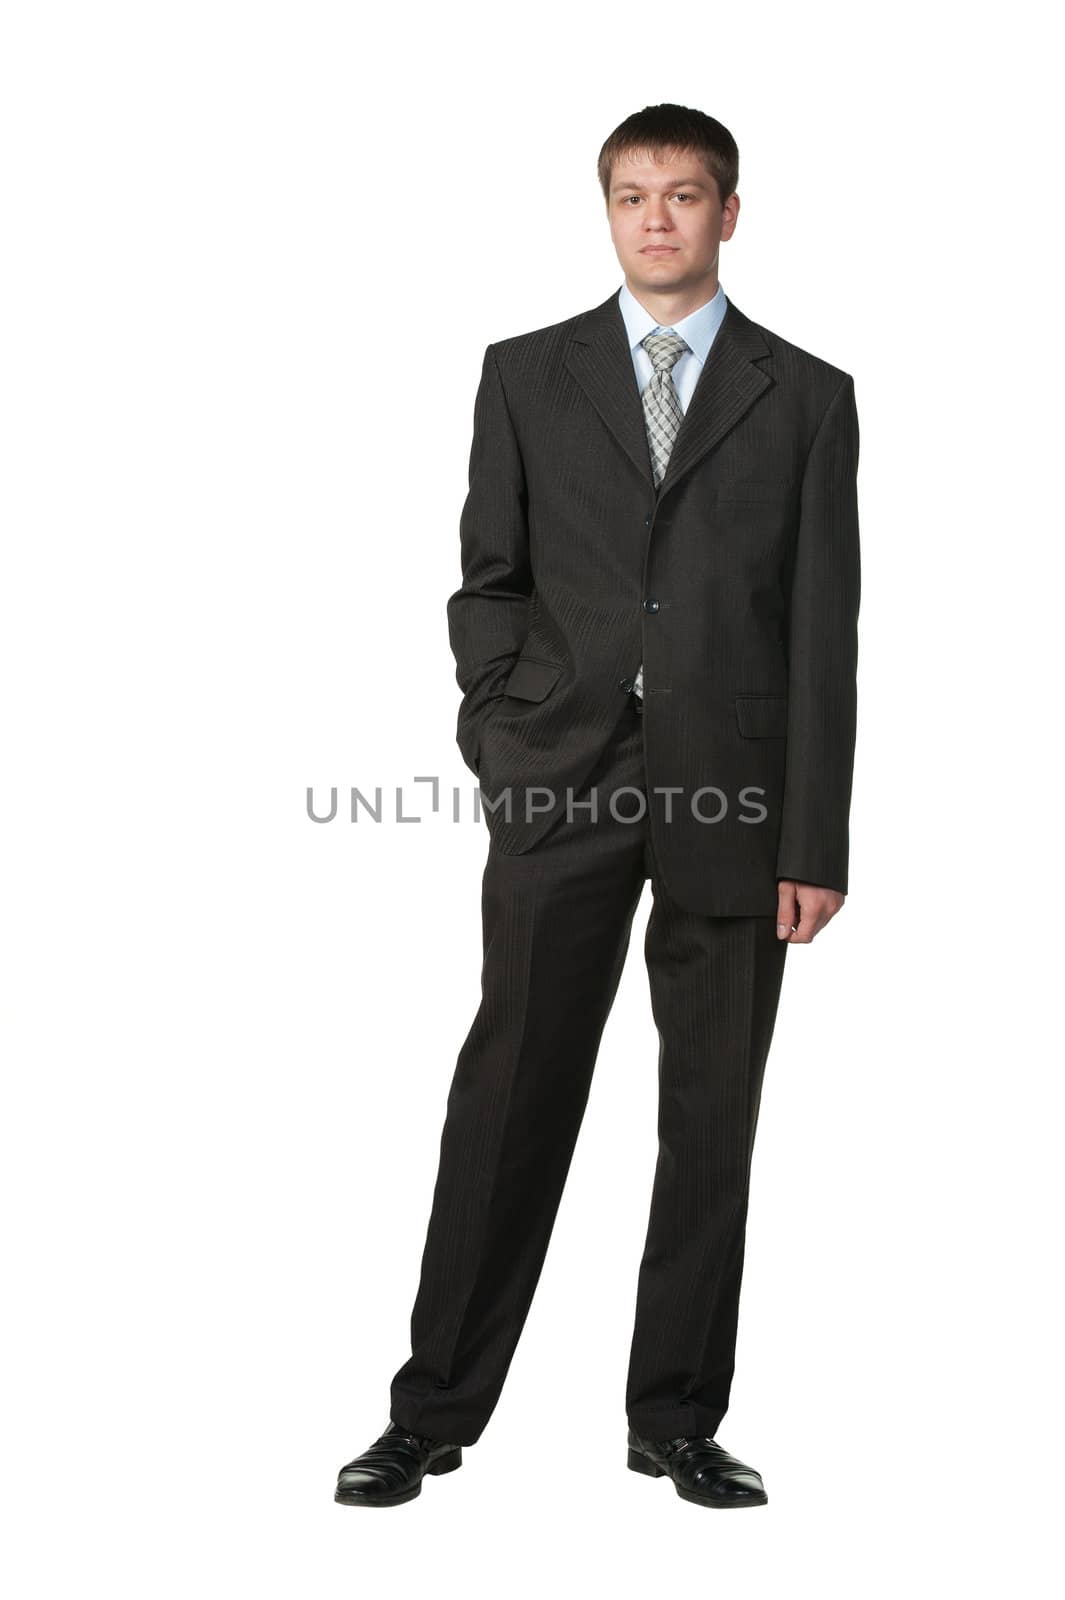 The young businessman in a suit by galdzer